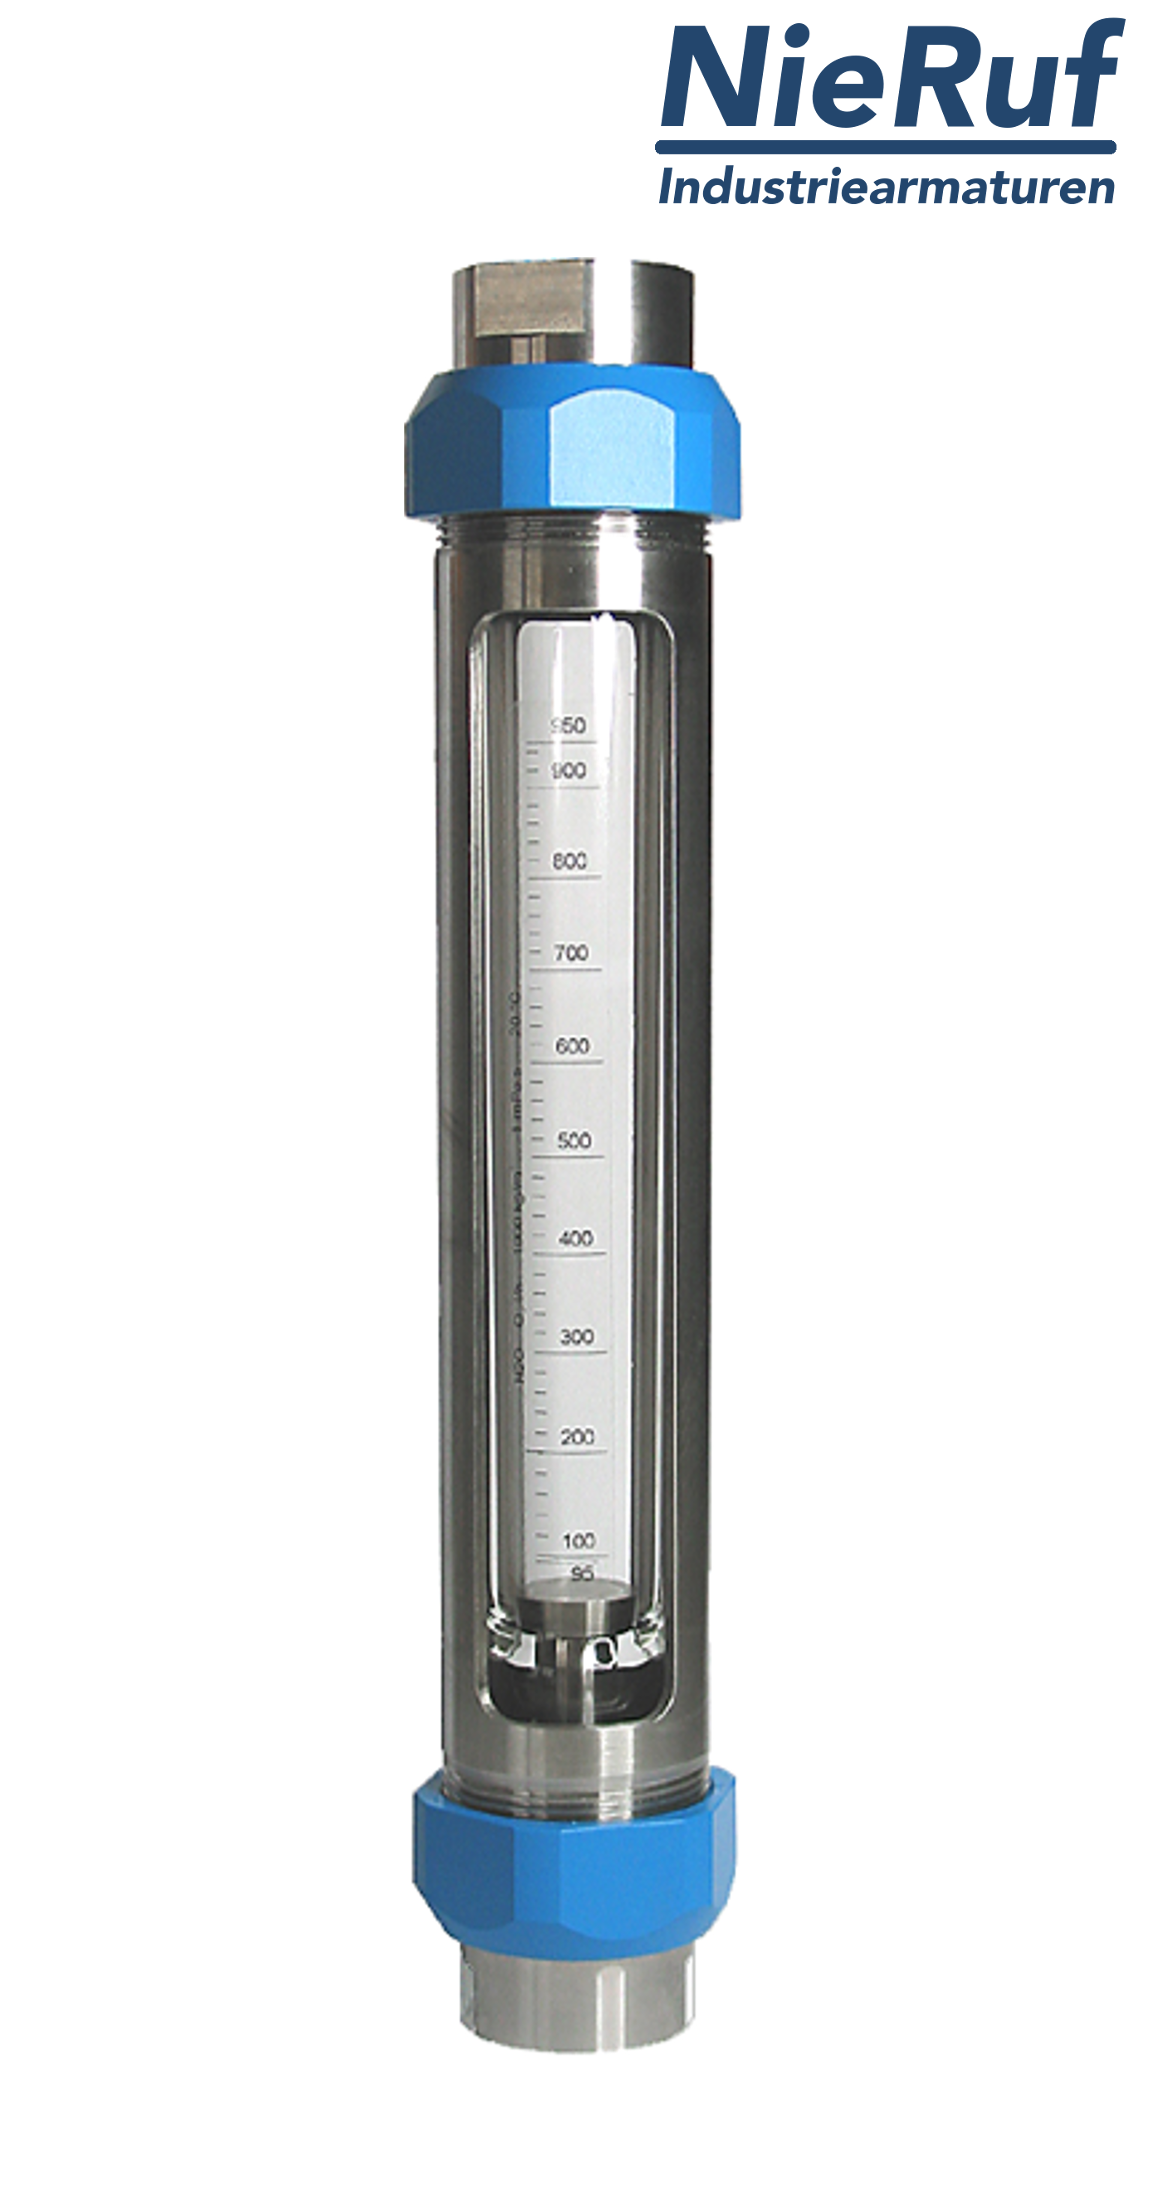 Variable area flowmeter stainless steel + borosilicate 1 1/2" inch 500.0 - 5000 l/h water EPDM